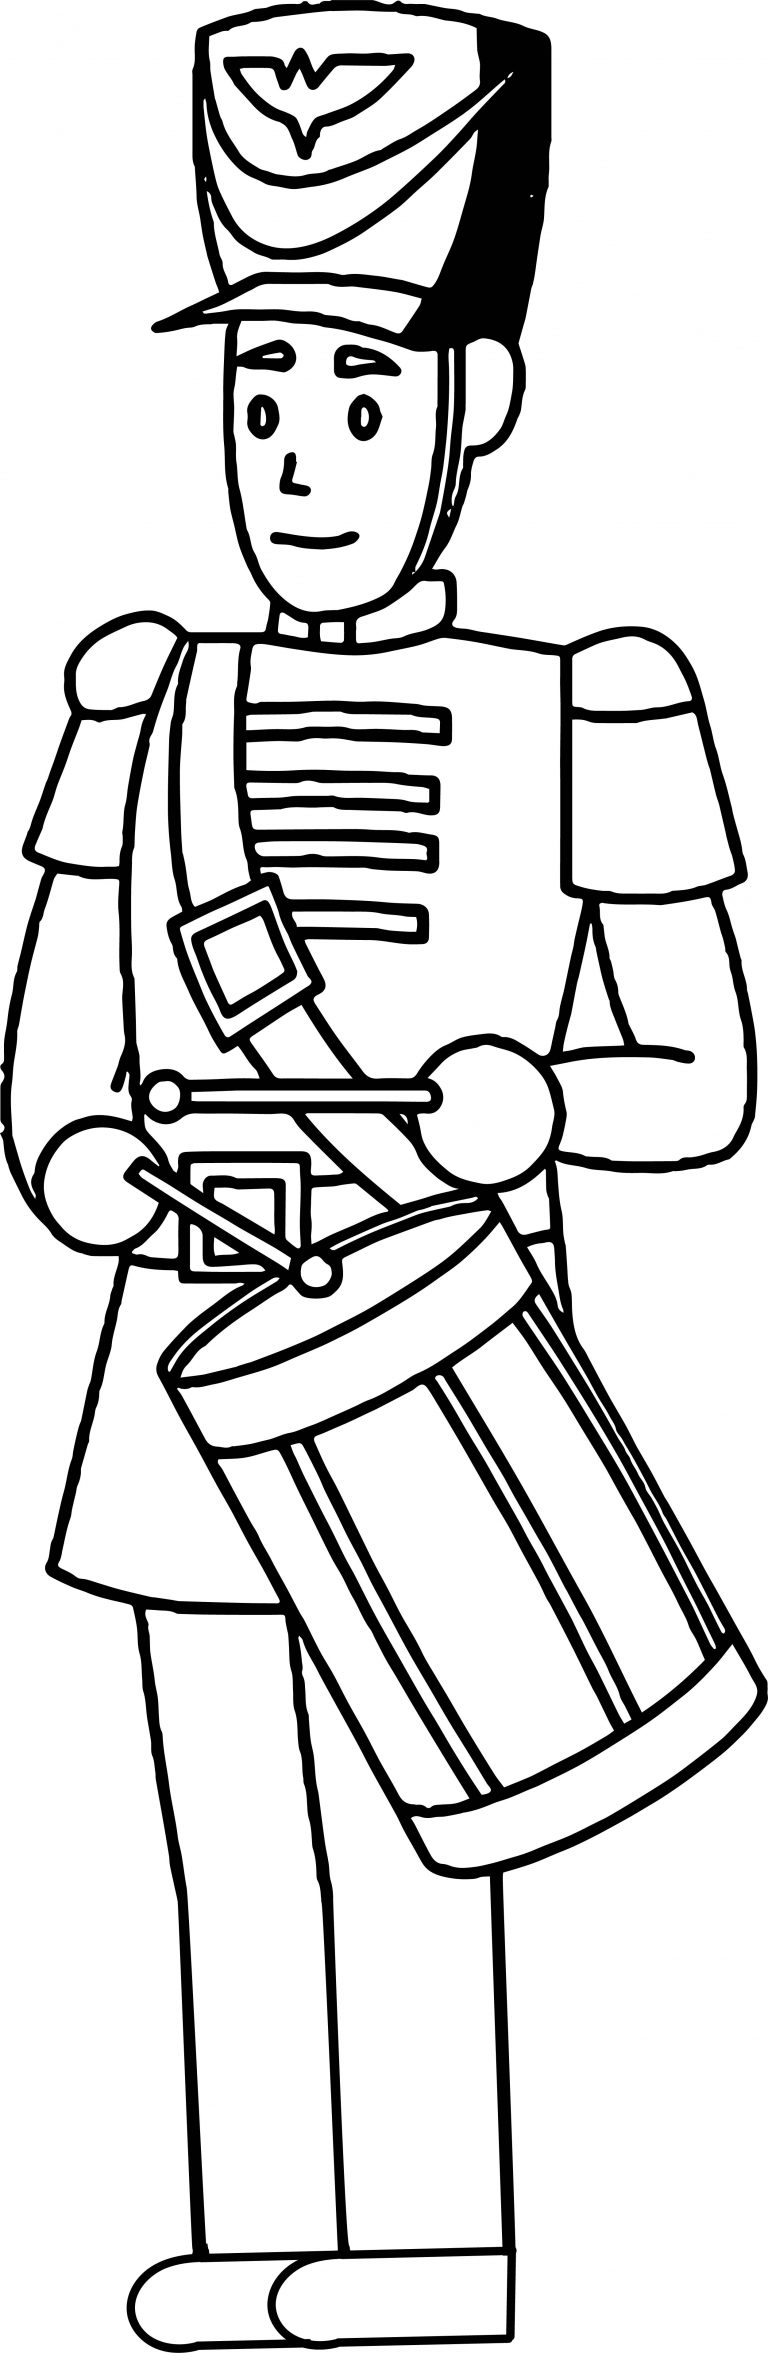 Wood Toy Soldier Coloring Page | Wecoloringpage.com